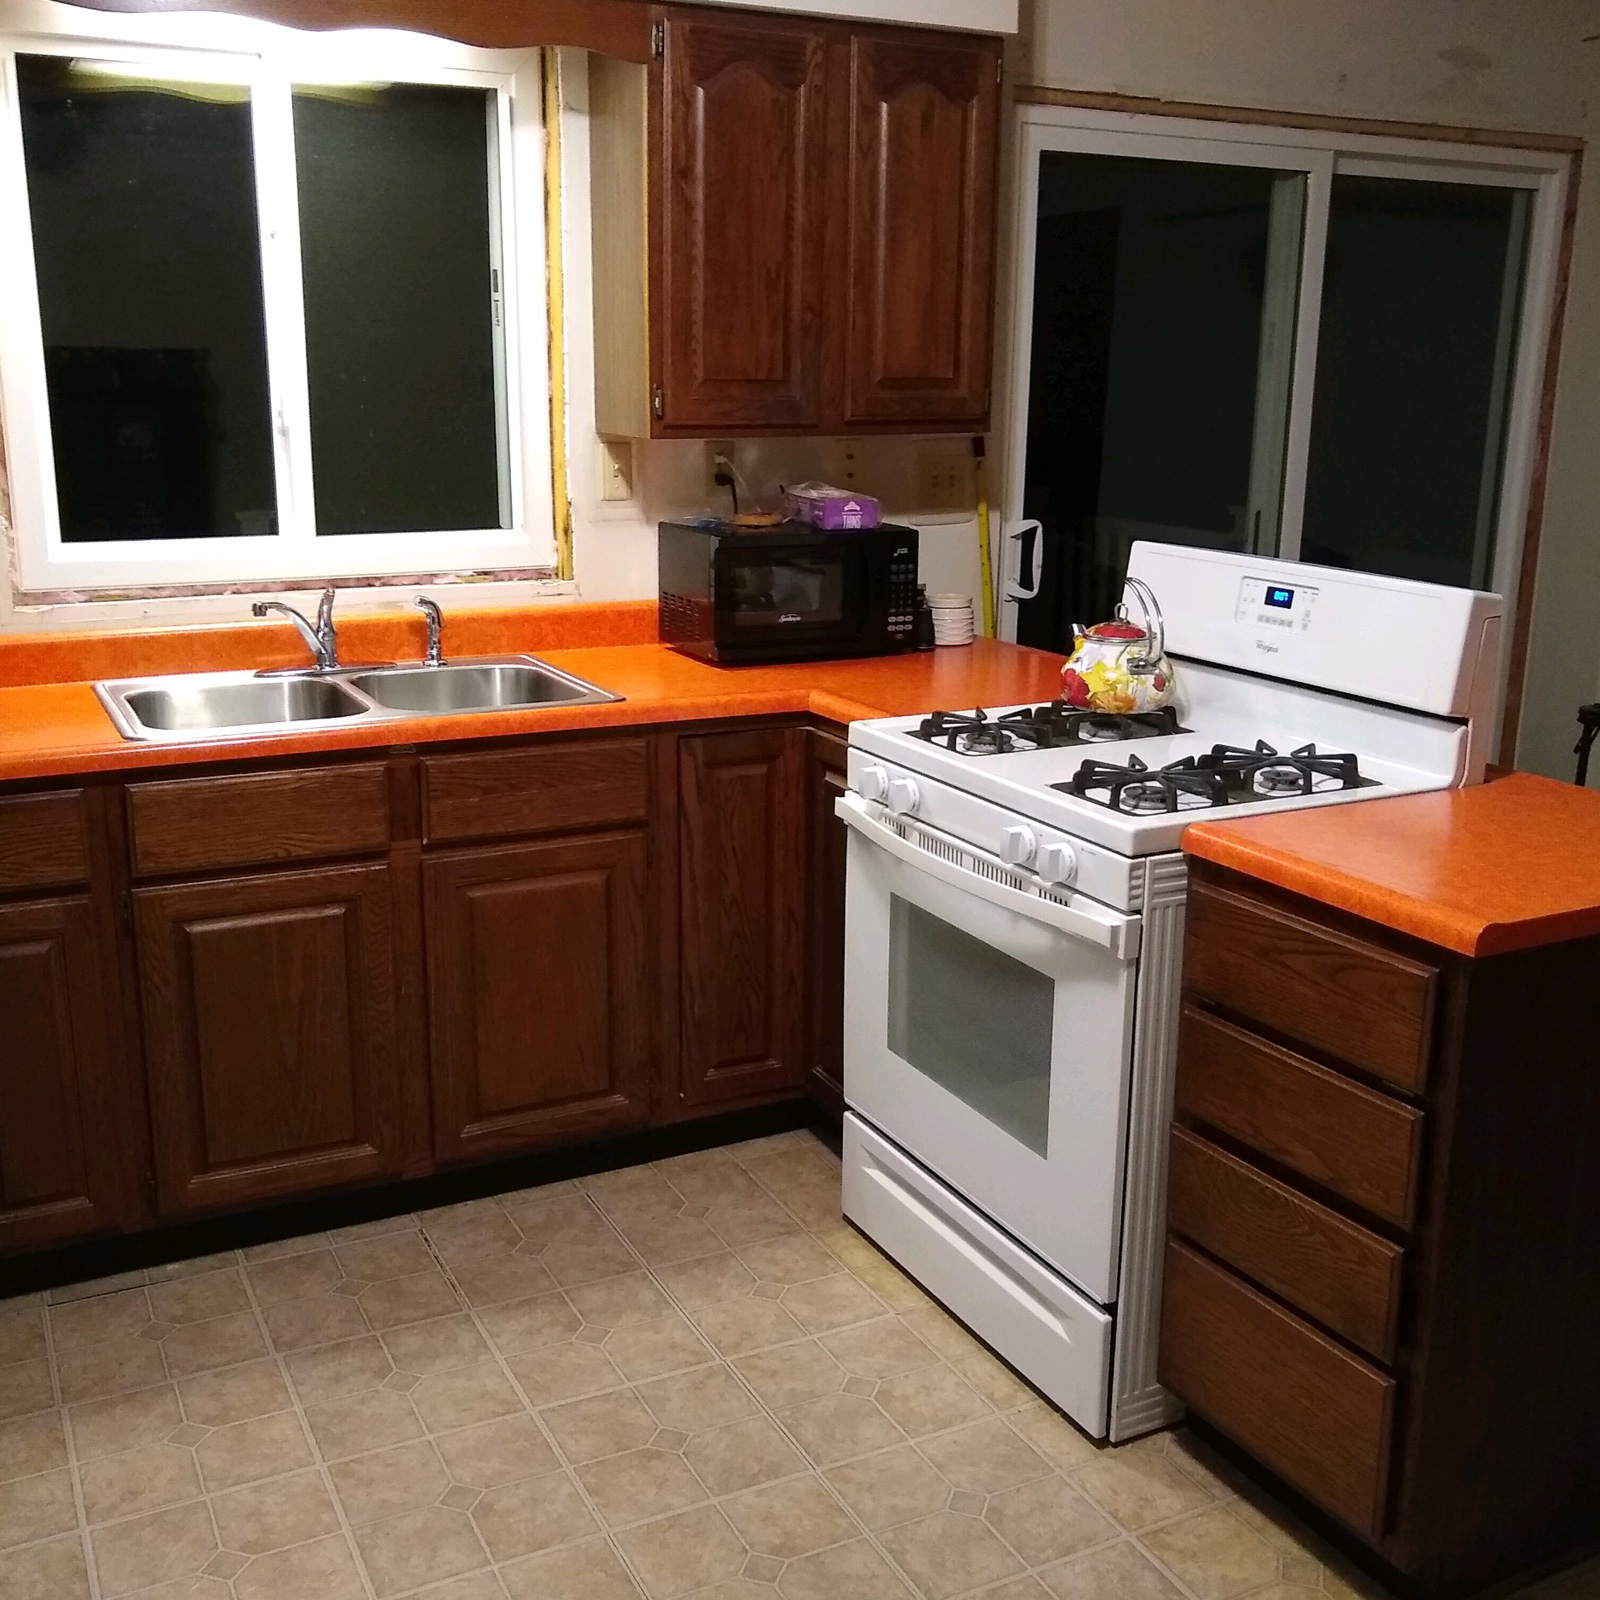 Entry 192 - These orange countertops are an abomination